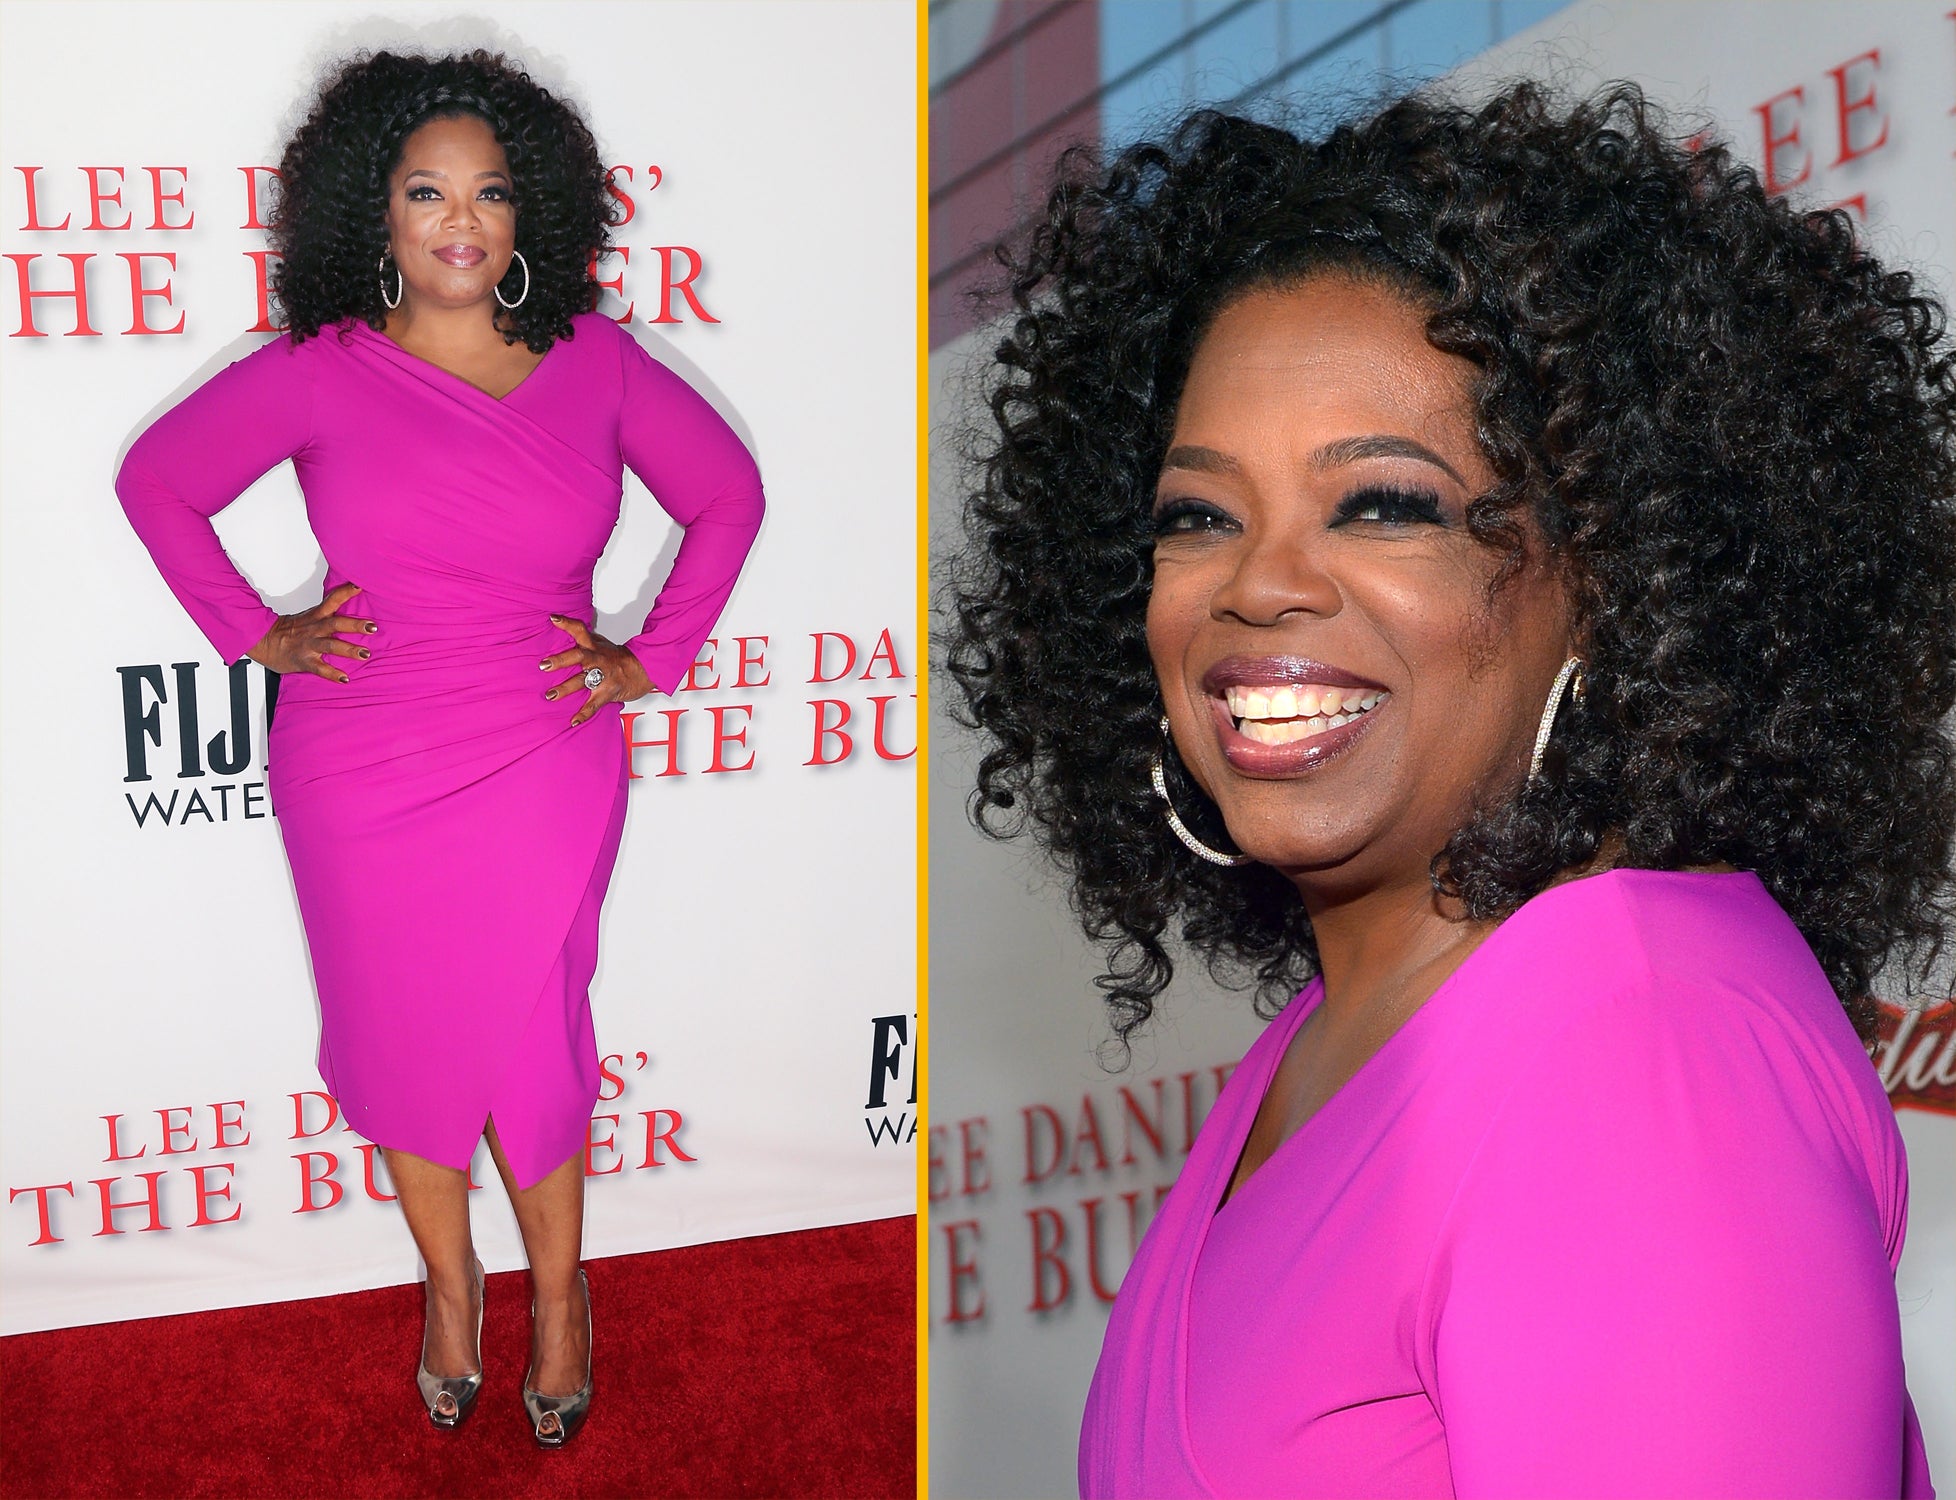 11 Things You Can Buy From Oprah's Yard Sale